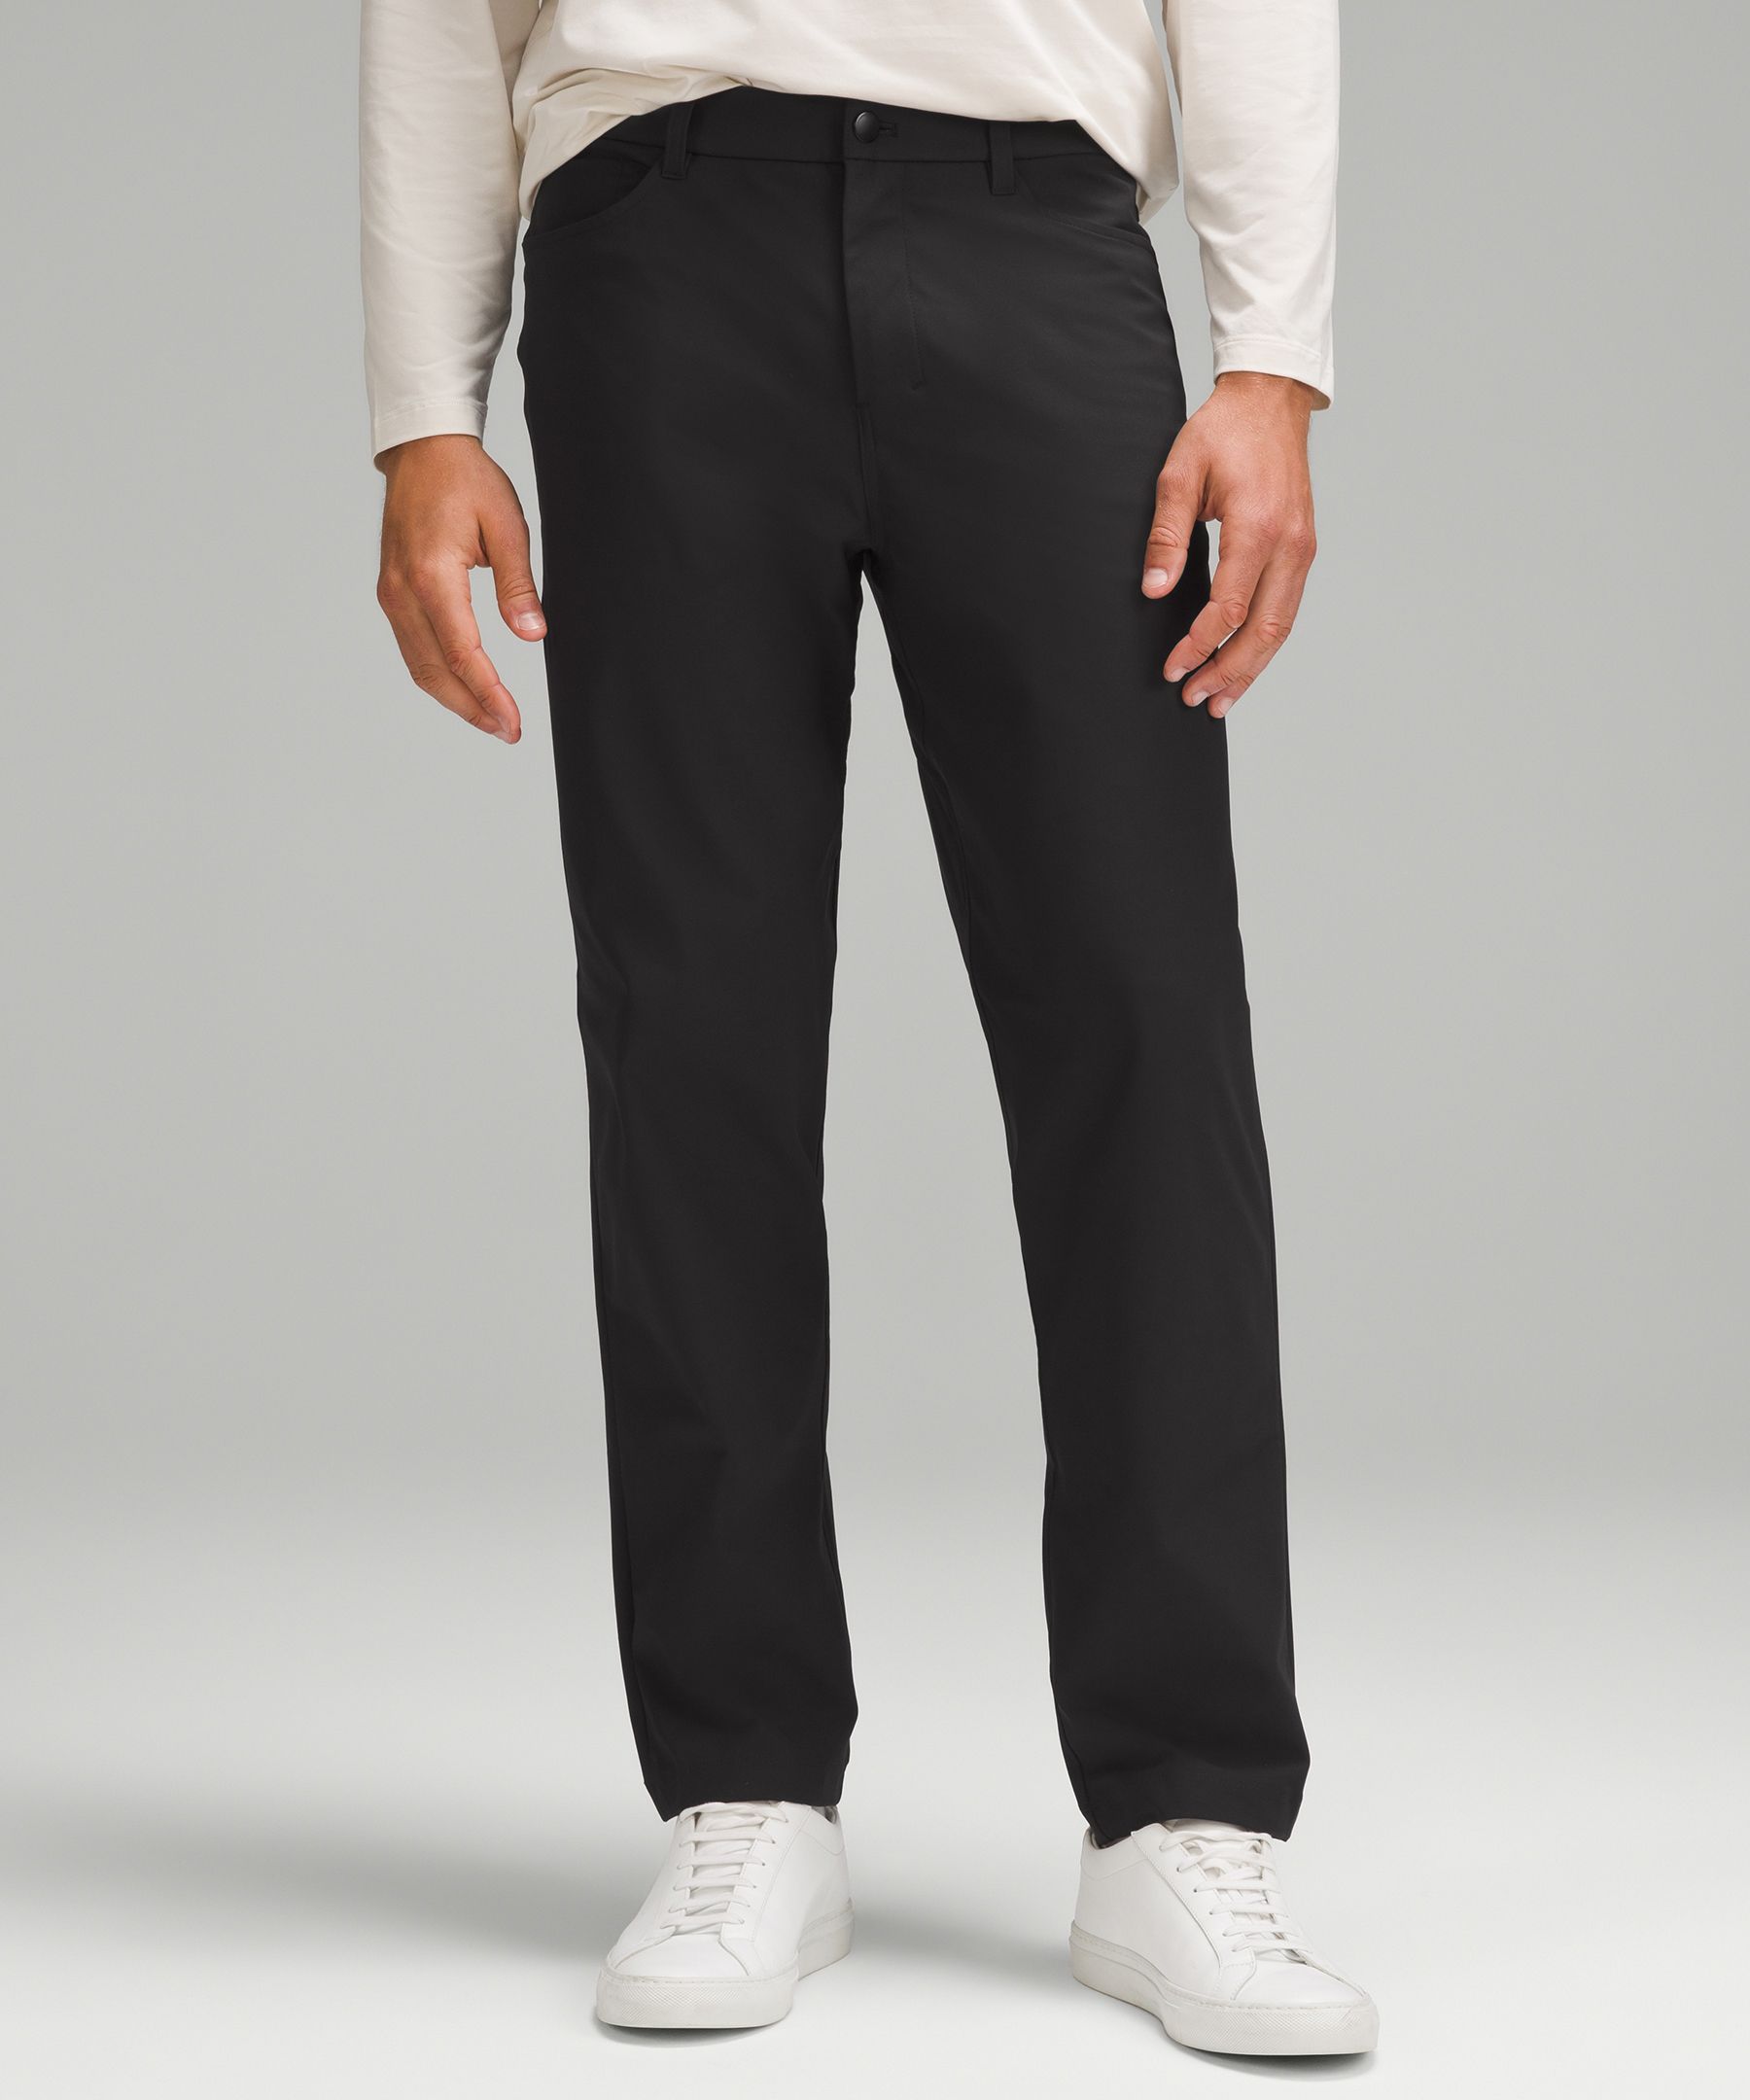 Lululemon Abc Pant Review  International Society of Precision Agriculture